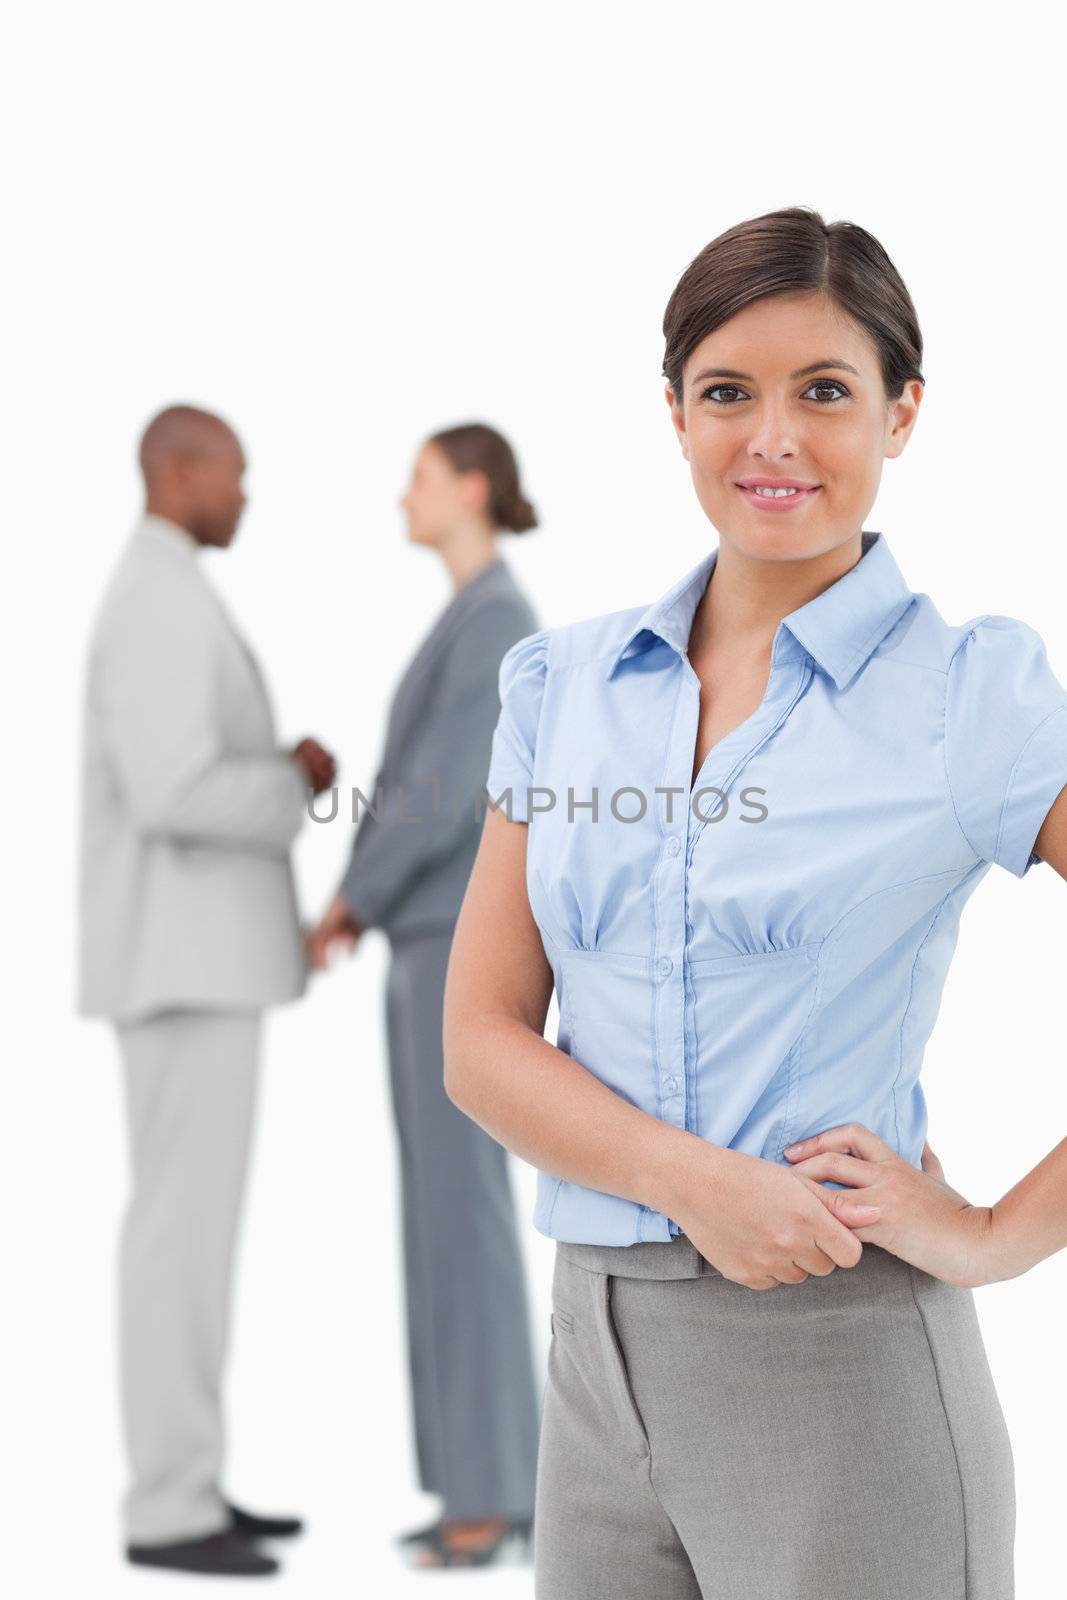 Smiling tradeswoman with talking colleagues behind her against a white background